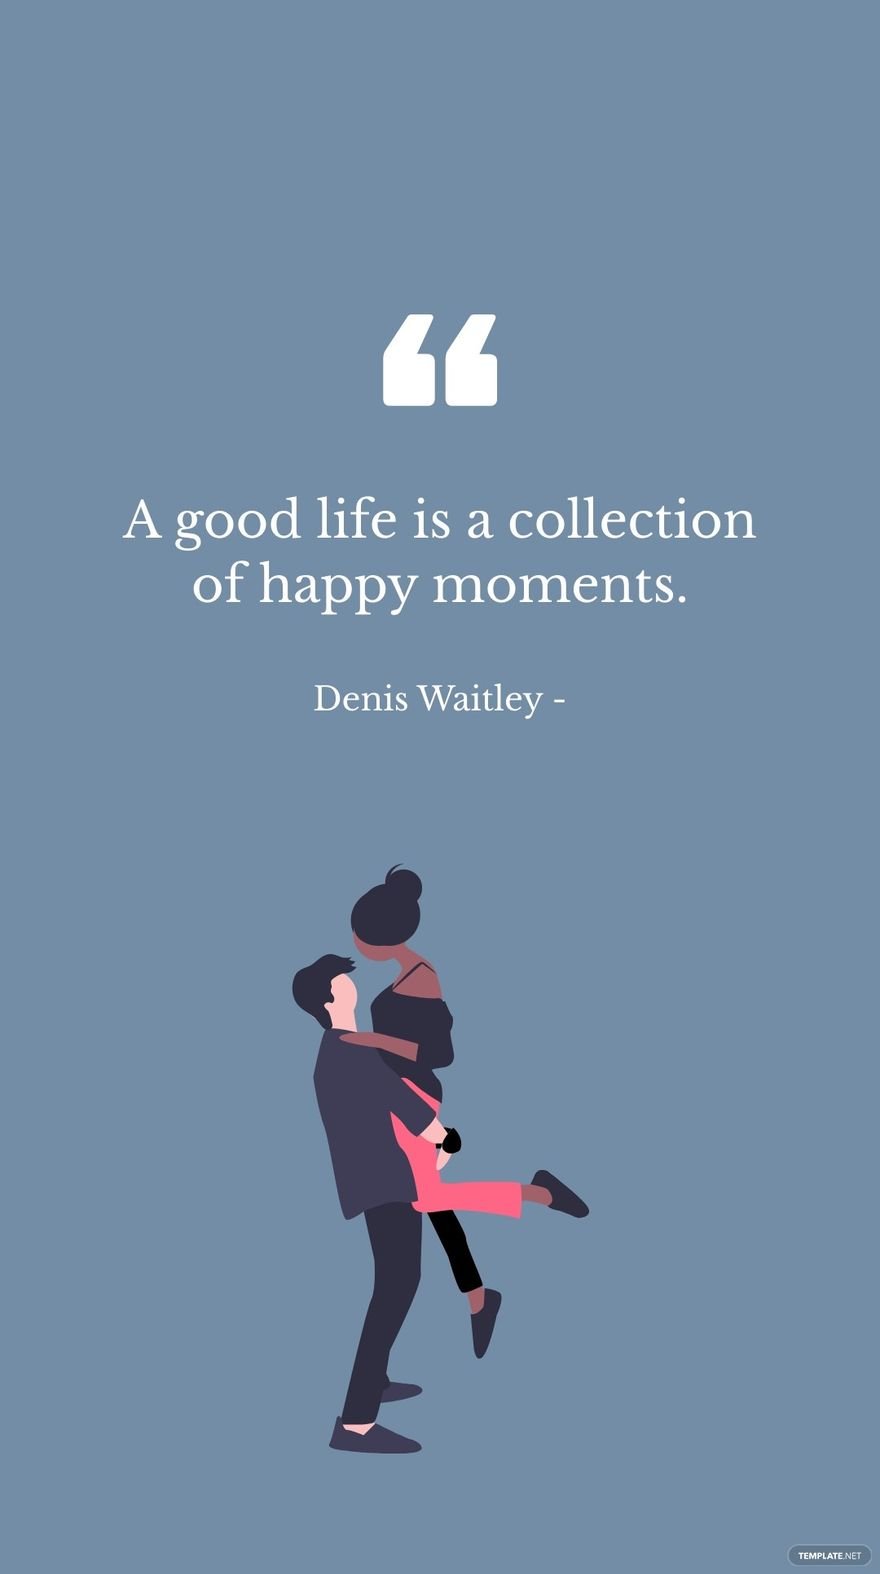 Free Denis Waitley - A good life is a collection of happy moments. -  Download in JPG